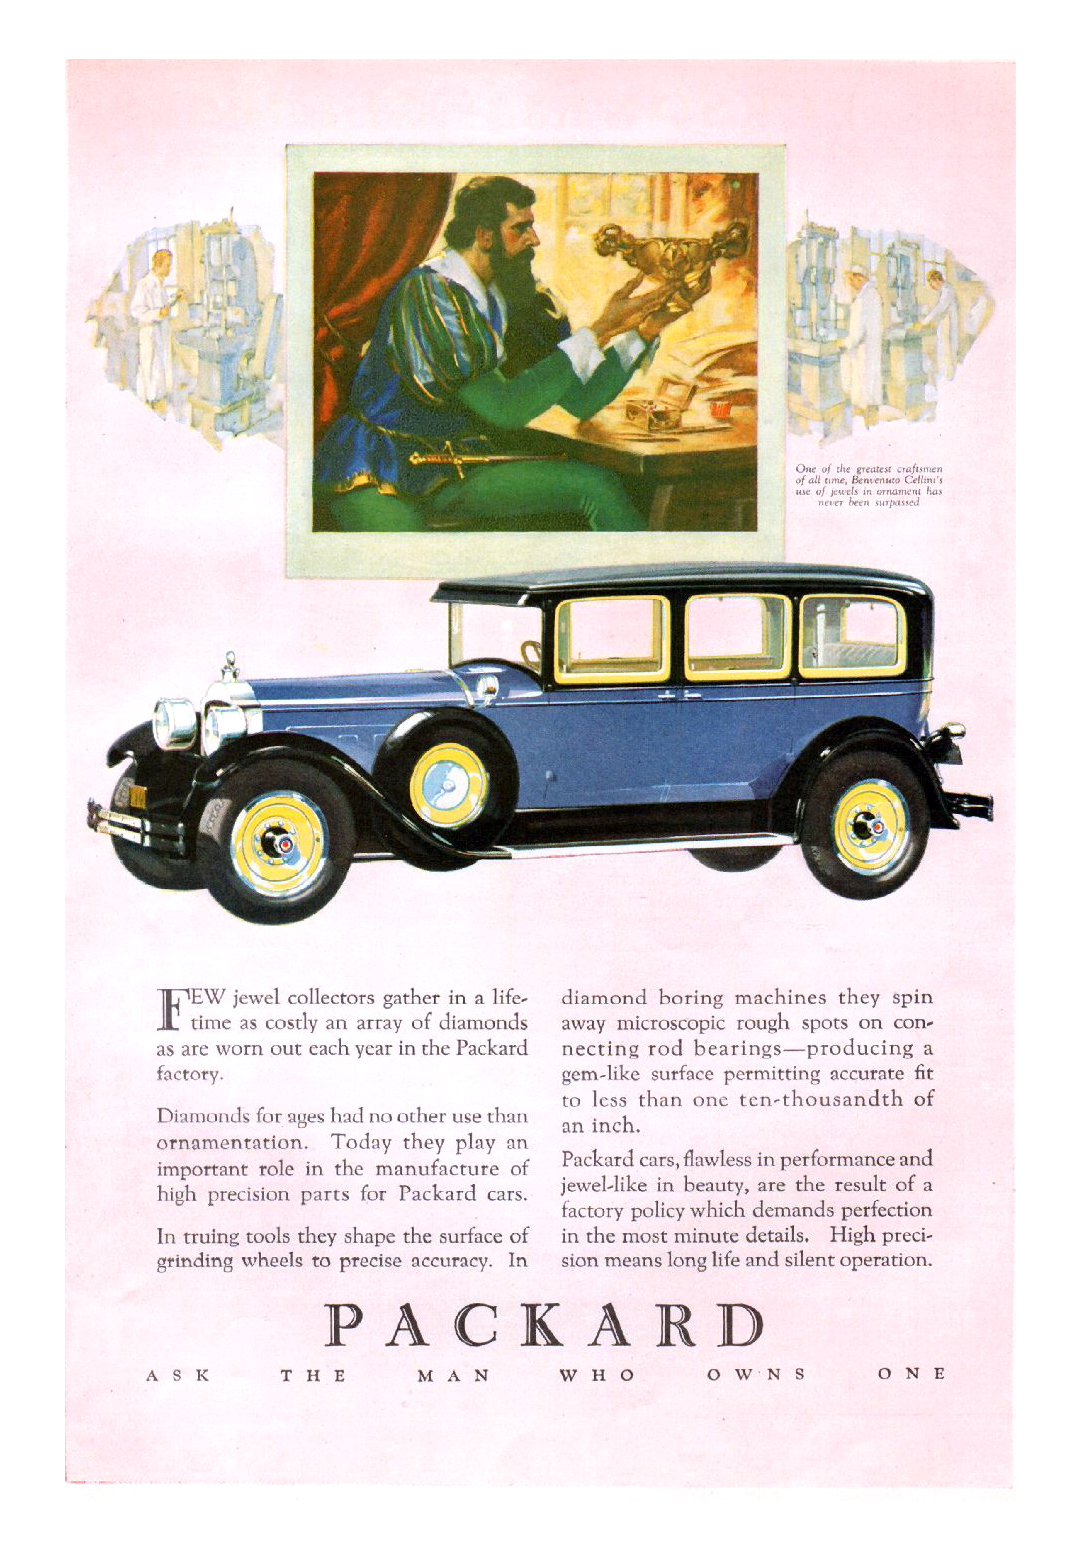 Packard Ad (November, 1928) - One of the greatest crafstmen of all time, Benvenuto Cellini's use of jewels in ornament has never been surpassed